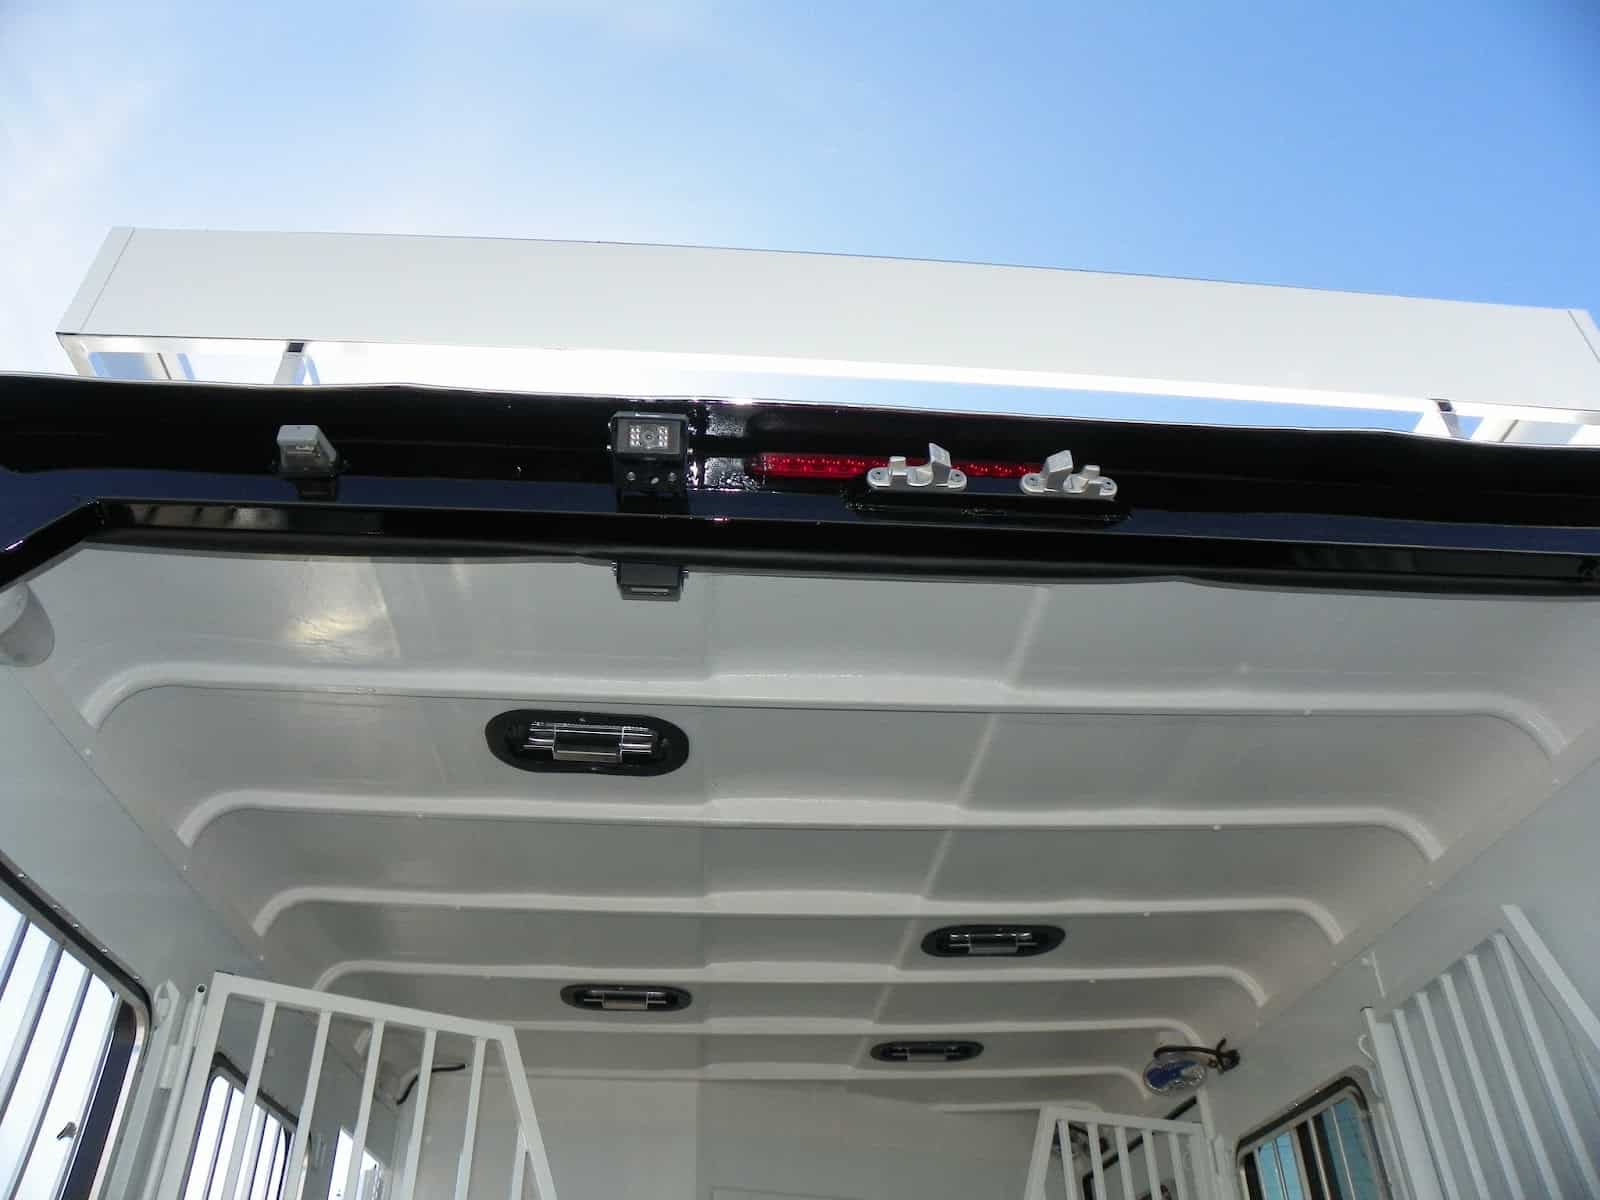 Double D Trailers SafeBump Roof Technology is designed to protect horses when they rear up during travel; or in the event of an accident.